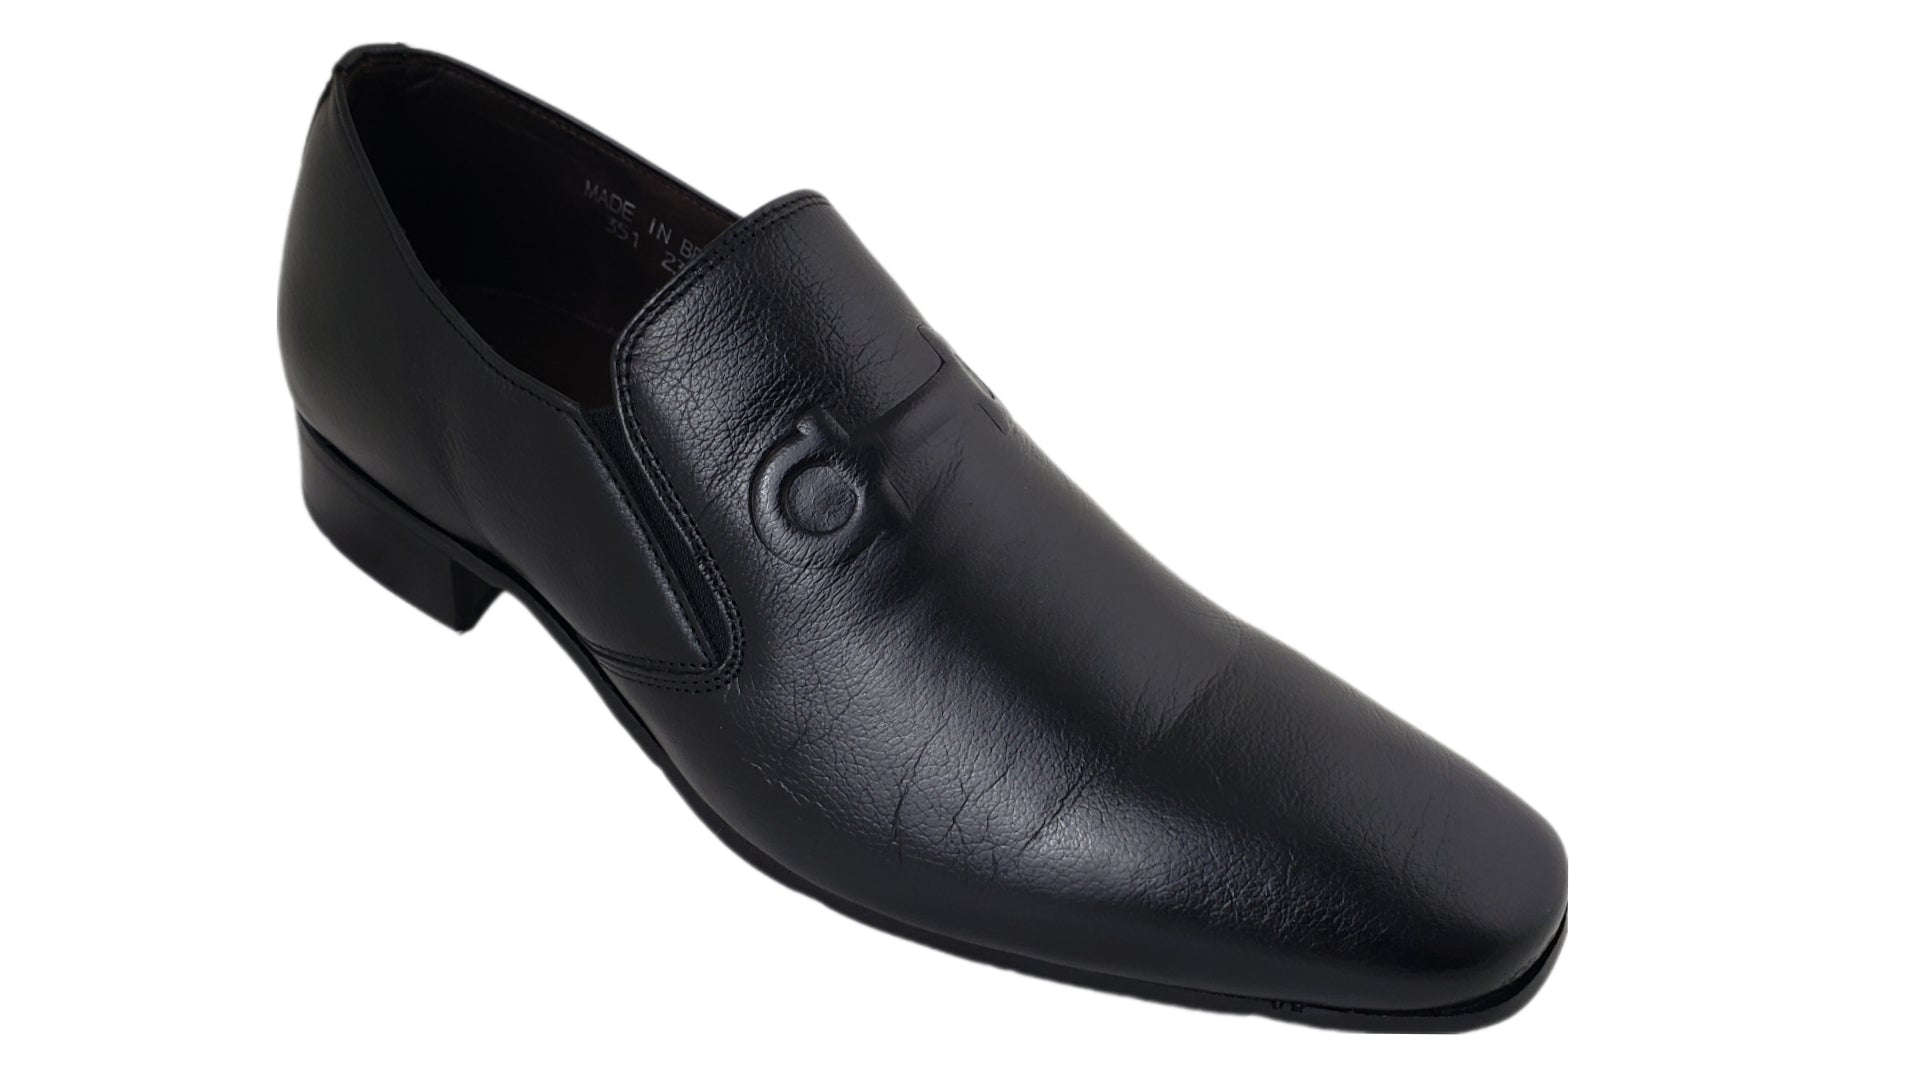 ALFREDO MEN'S BLACK DRESS SLIP ON SHOES WITH MIXED SOLE 351-1